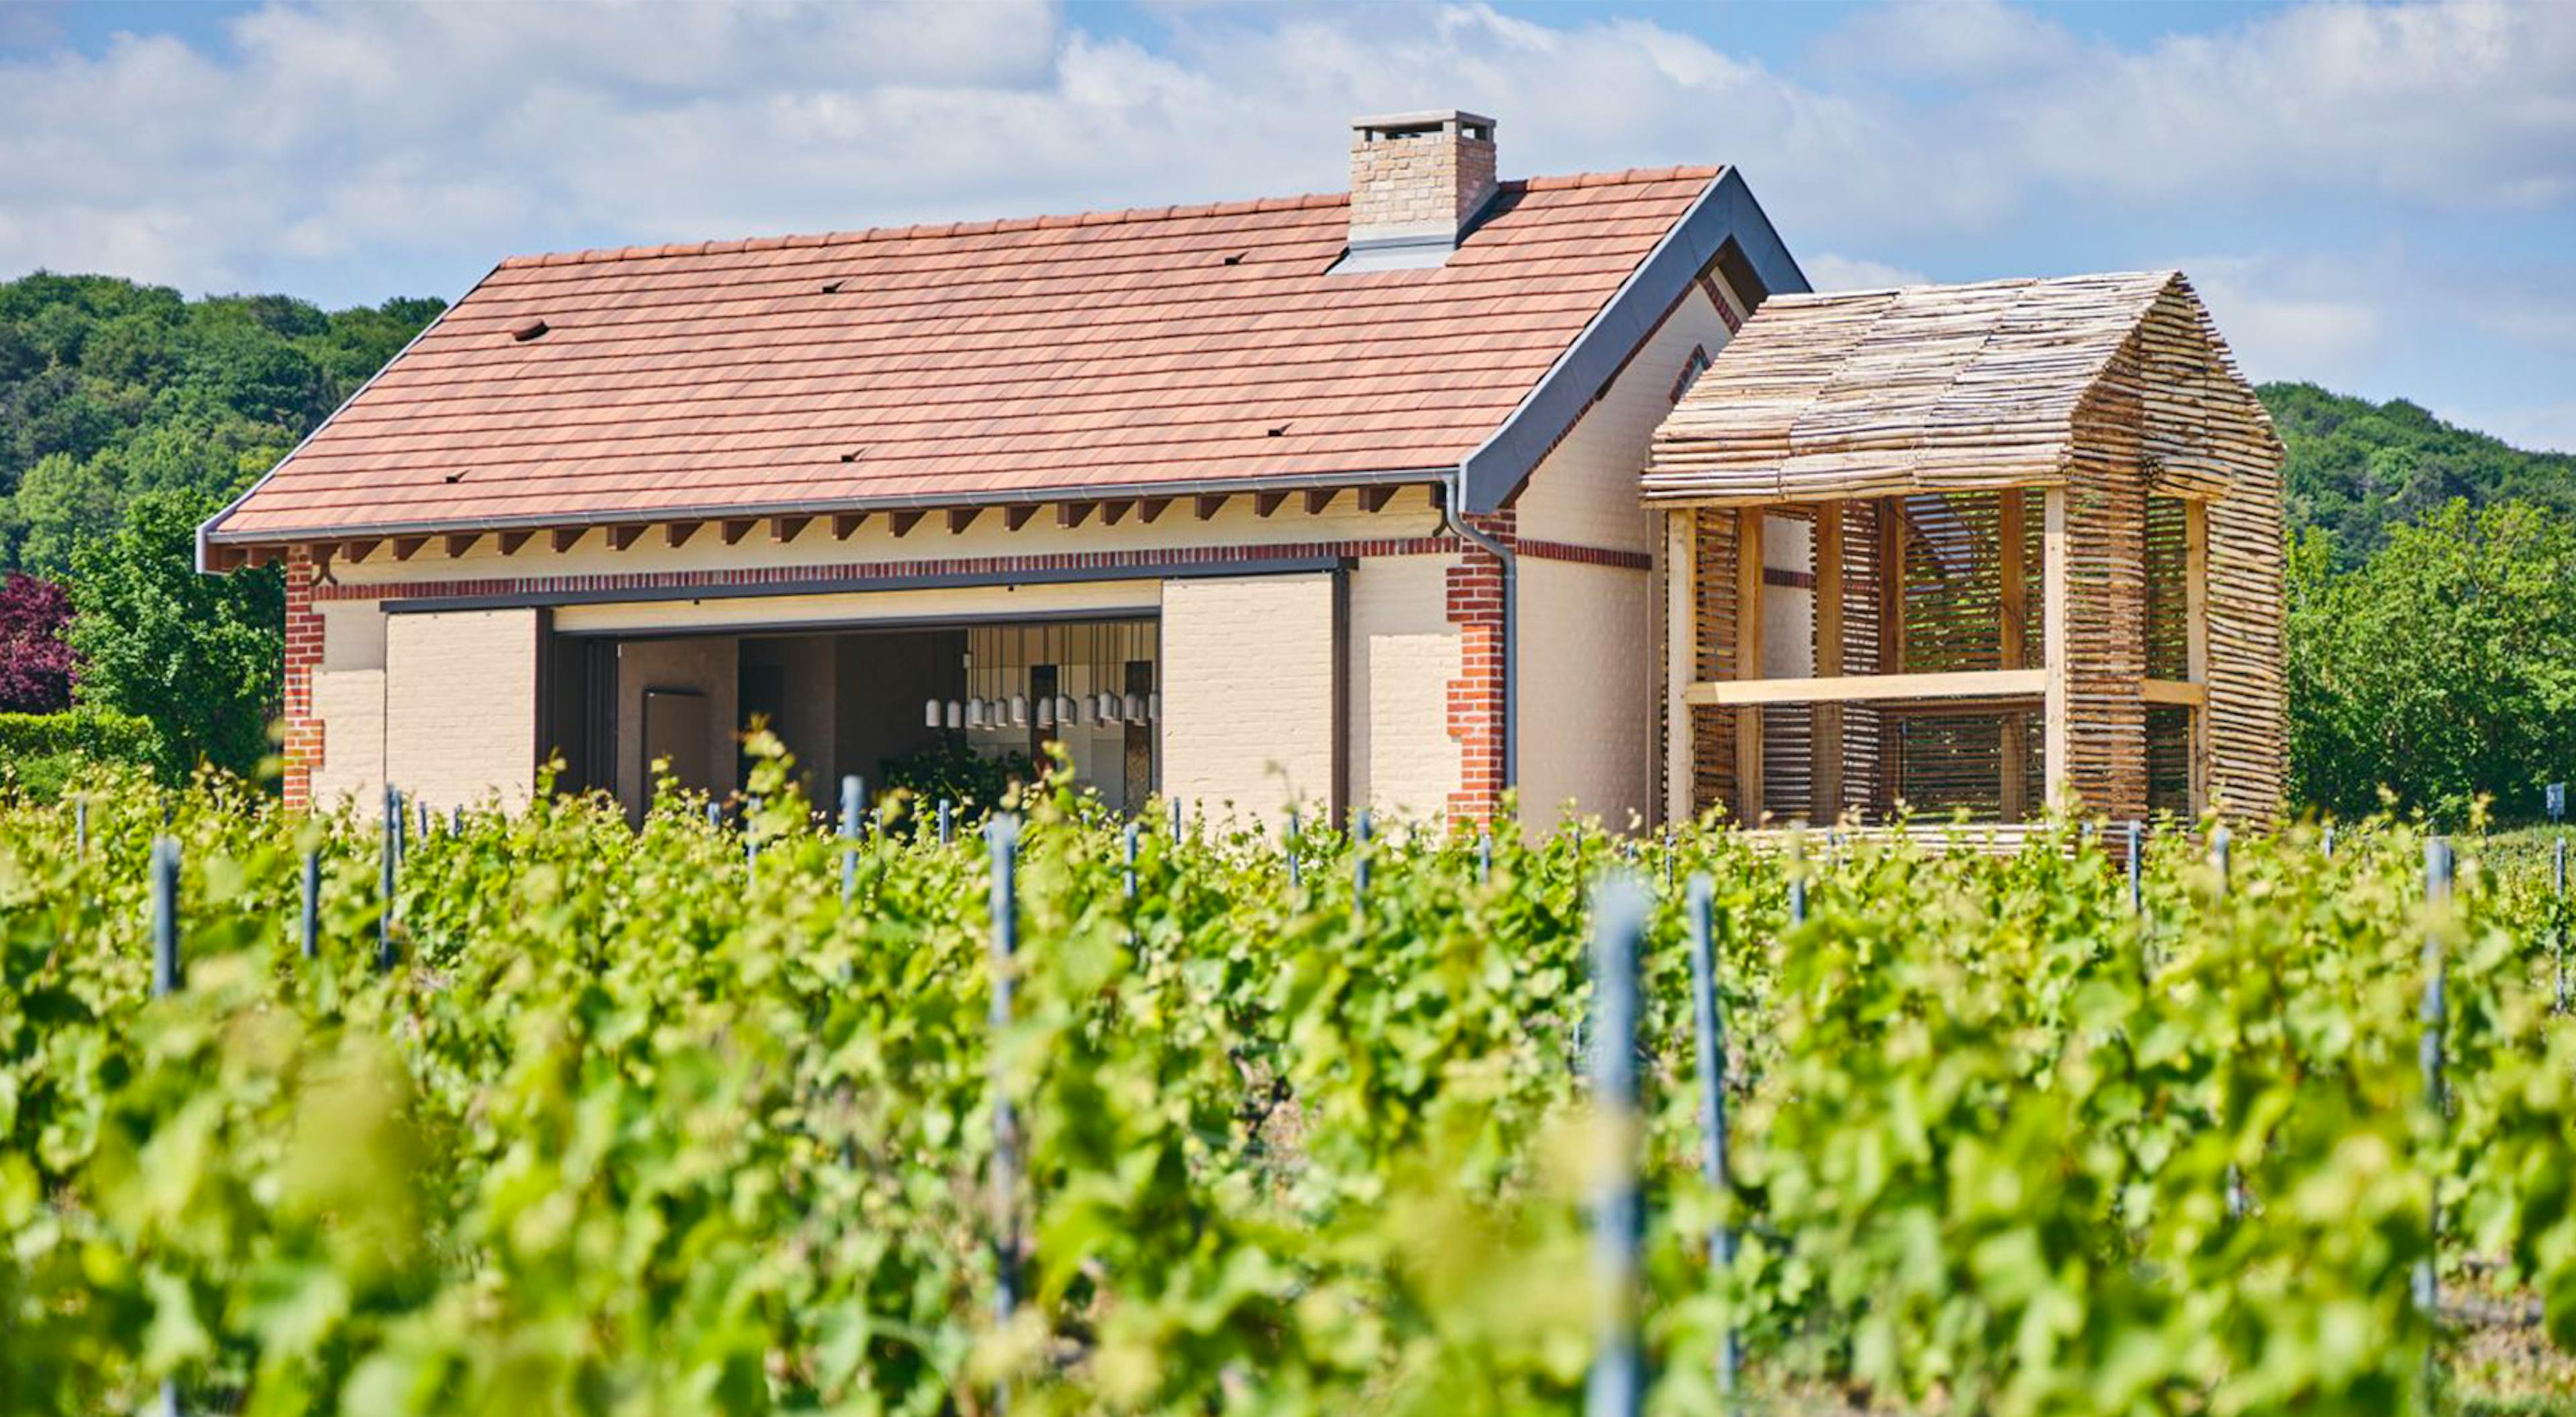 Cover Krug continues initiatives to preserve and promote heritage, renovating a historic lodge in the heart of Champagne